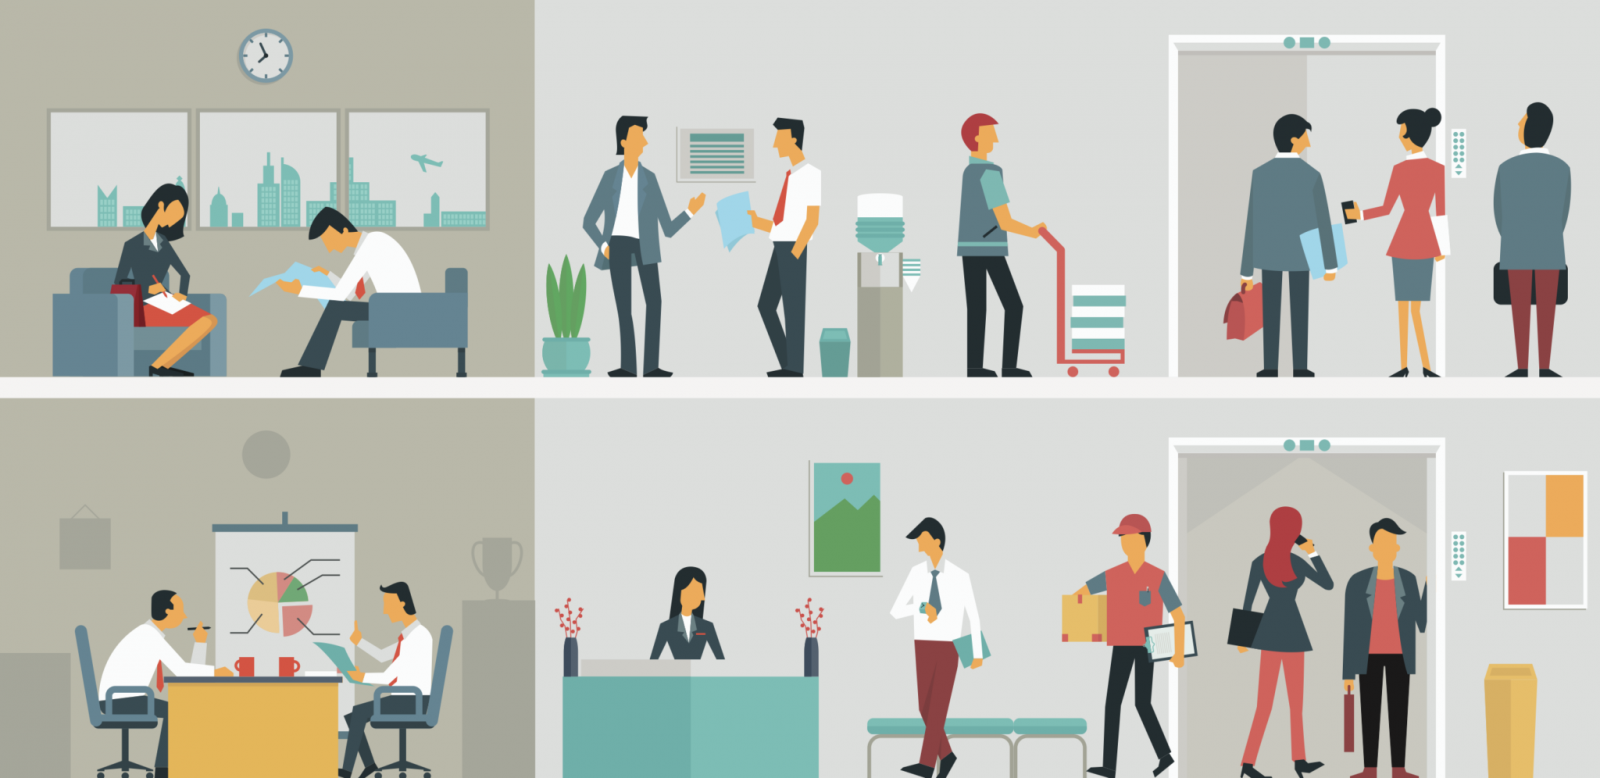 7 factors to build a working environment for companies